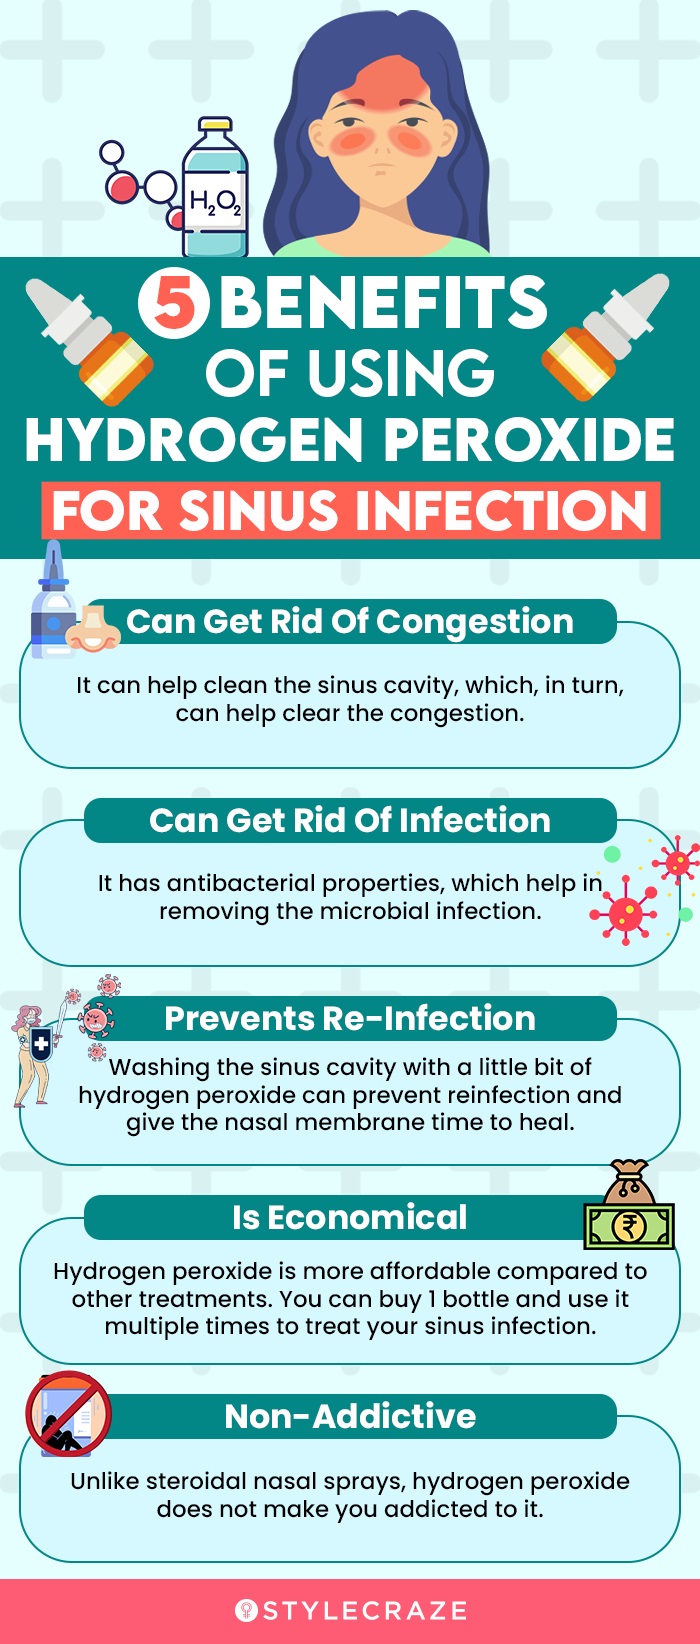 5 benefits of using hydrogen peroxide for sinus infection (infographic)